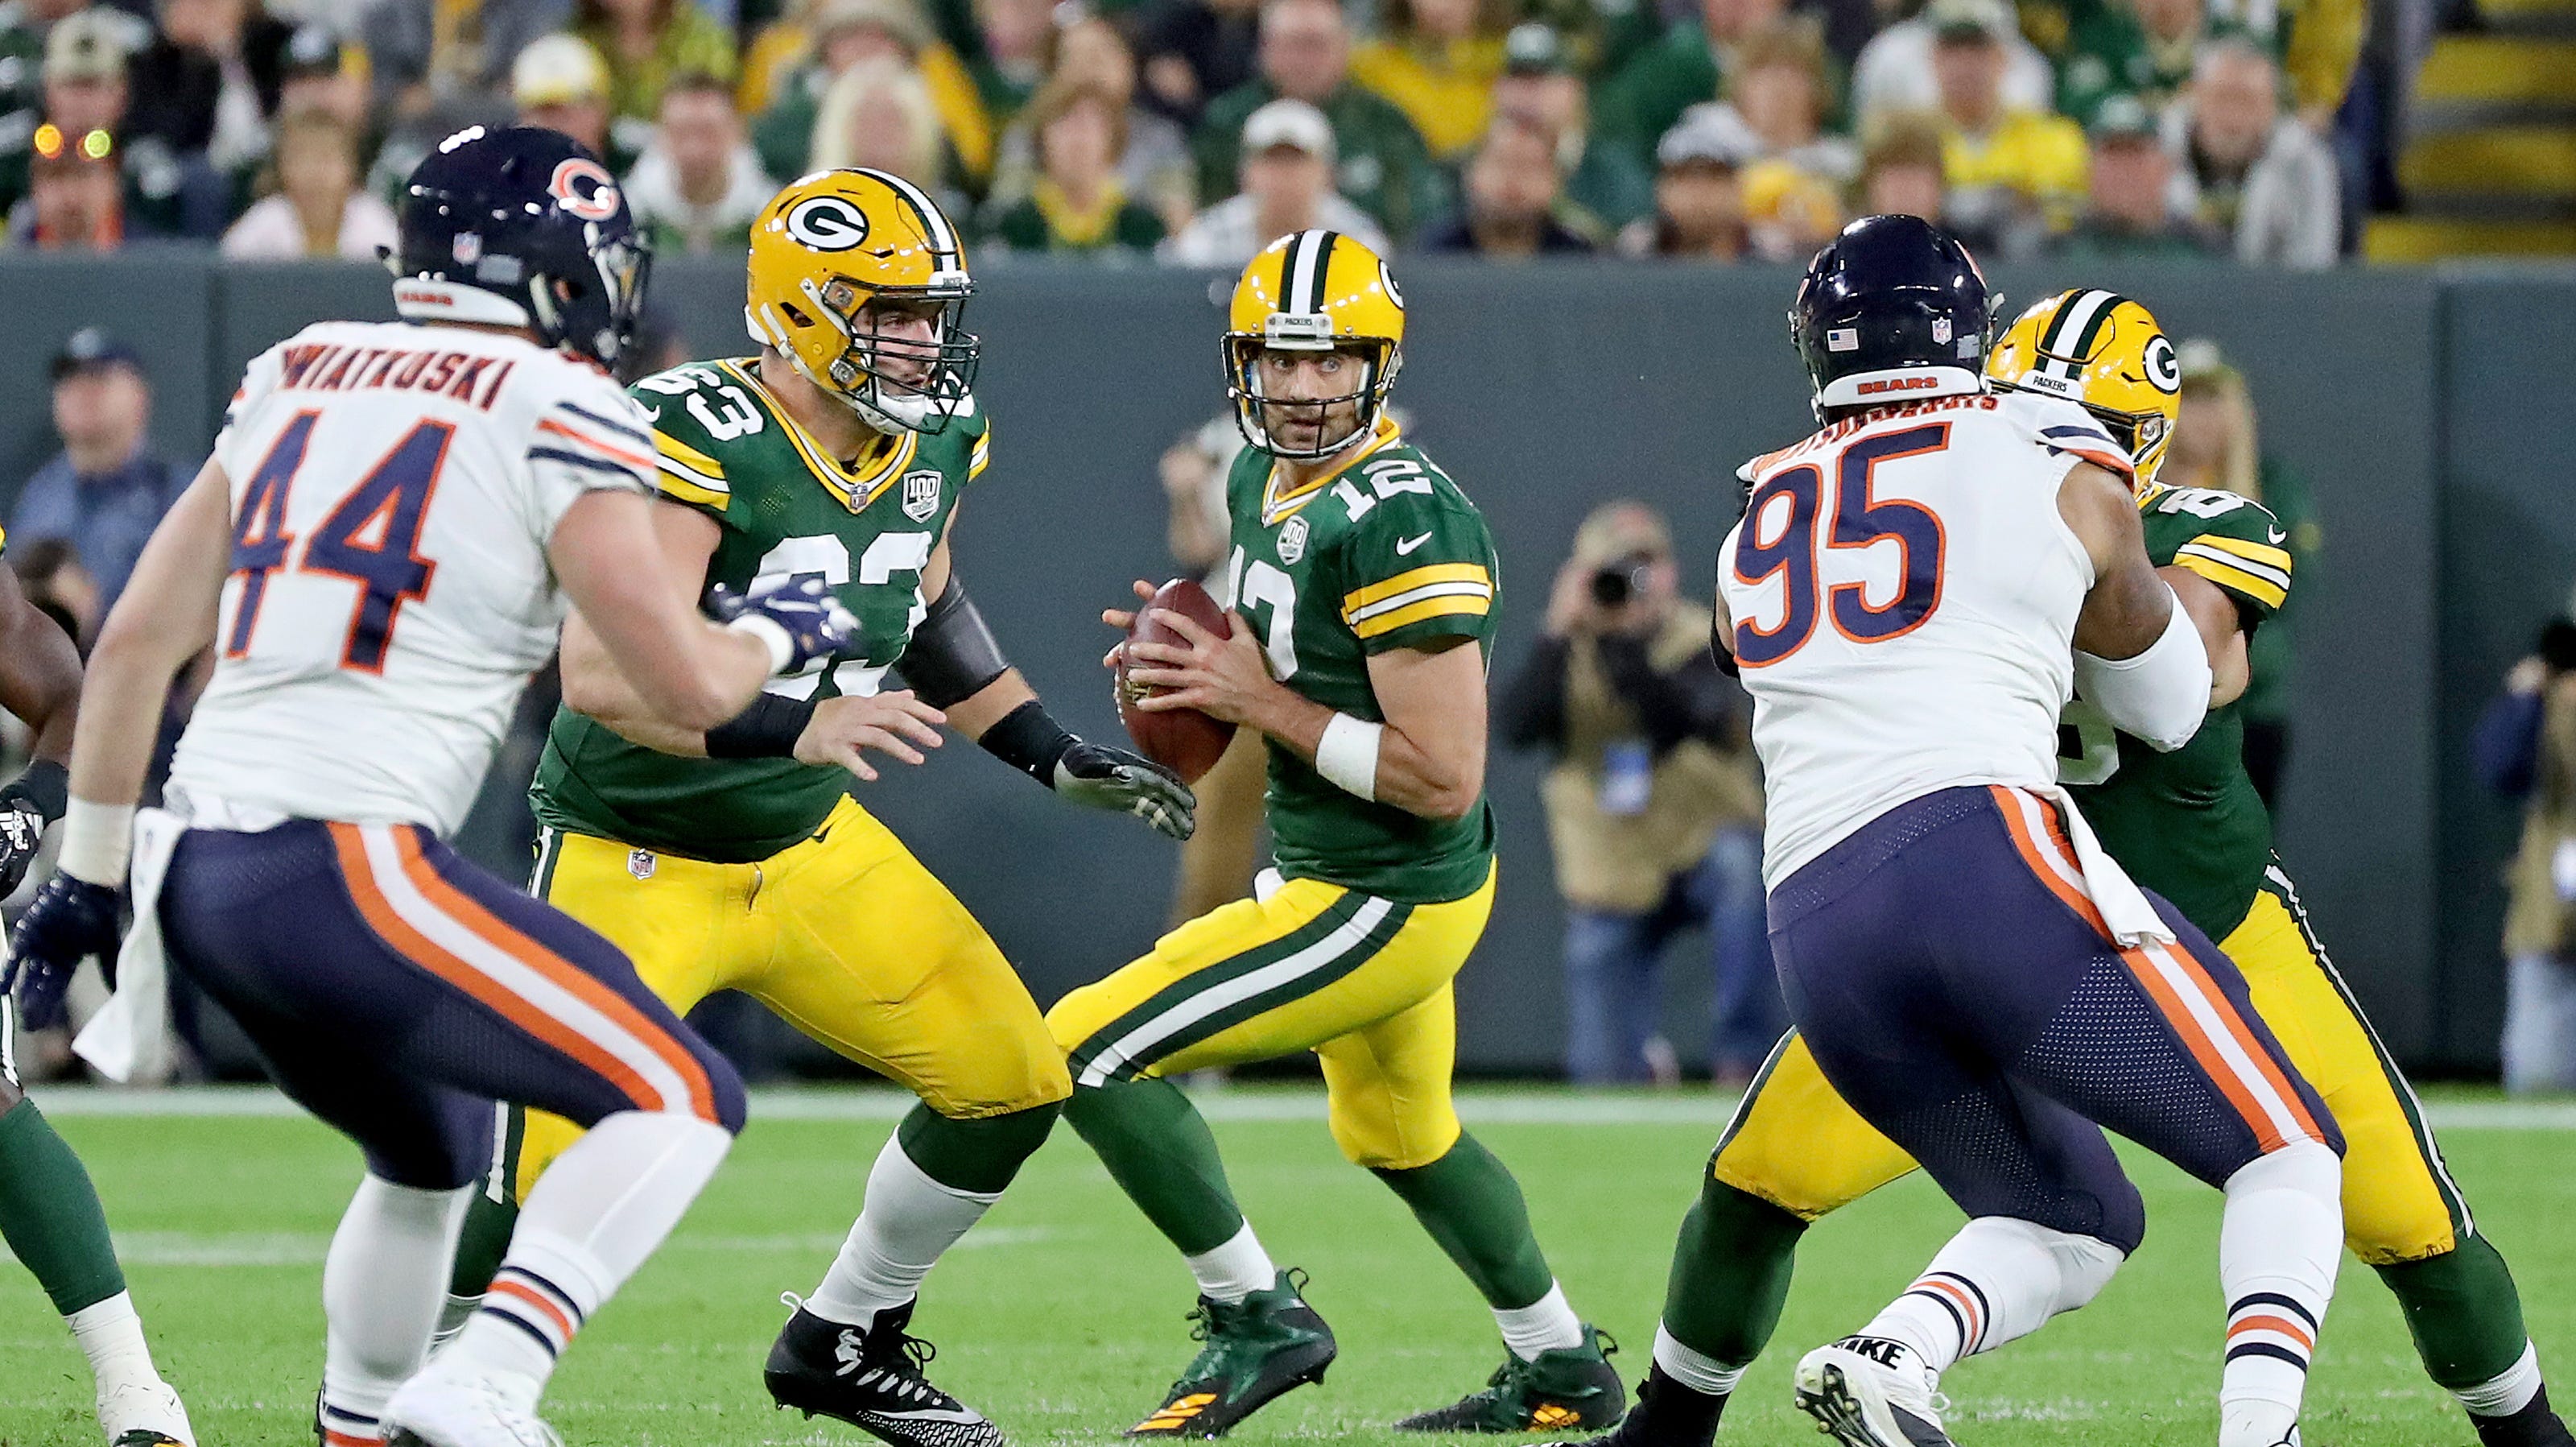 Green Bay Packers The team's history vs. every NFL team